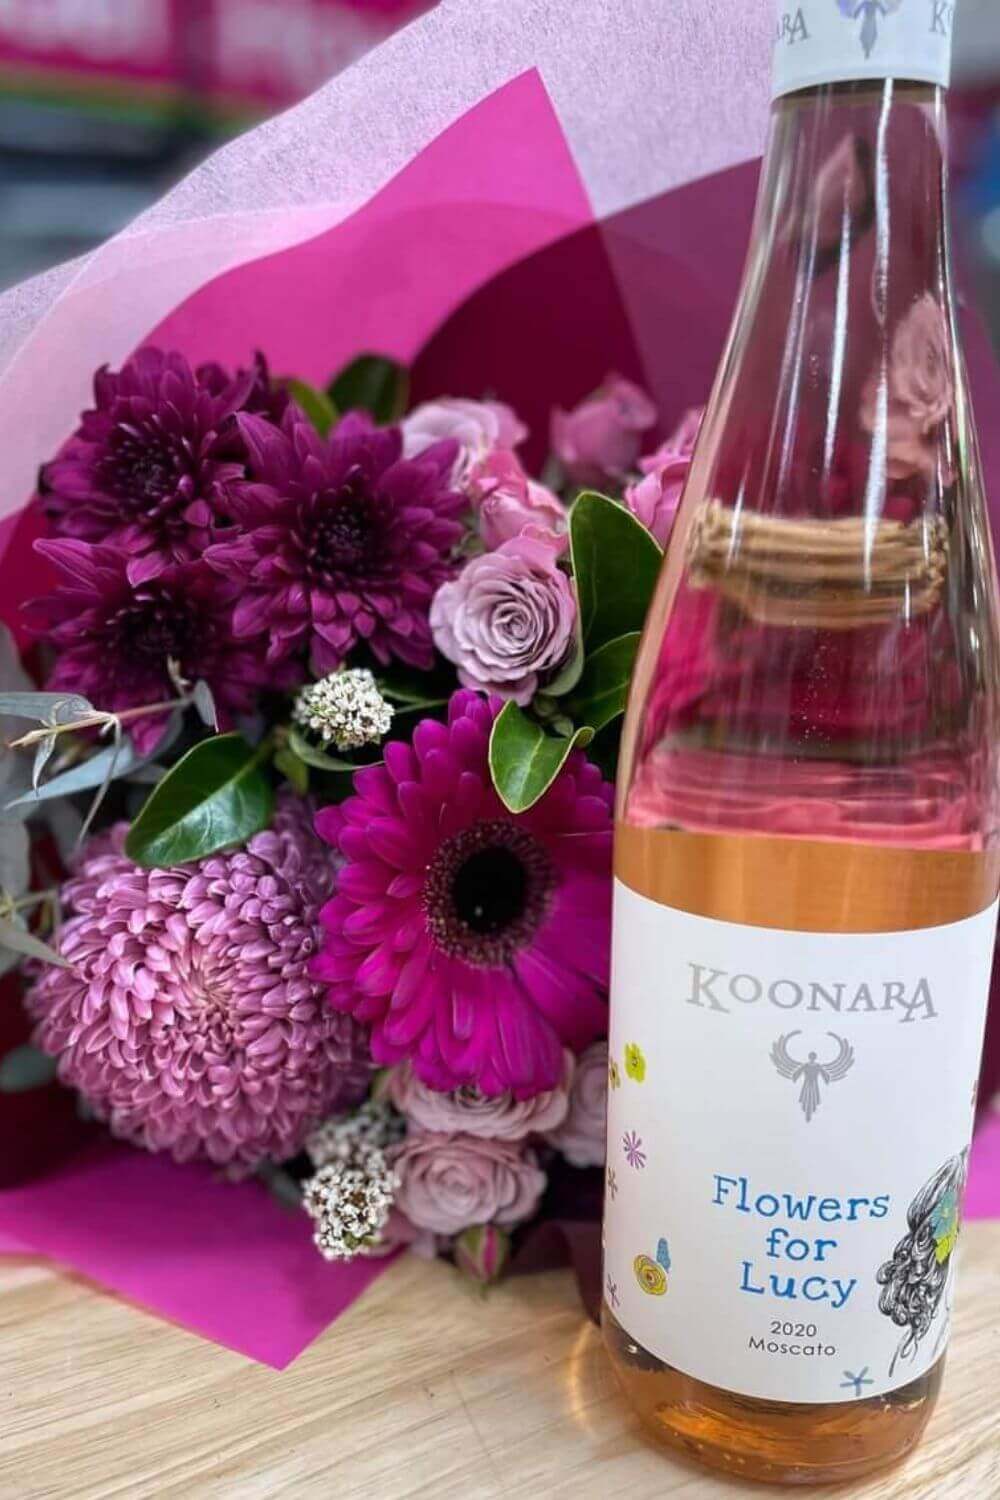 Flowers for Lucy Moscato wine along side a bright pink bunch of flowers